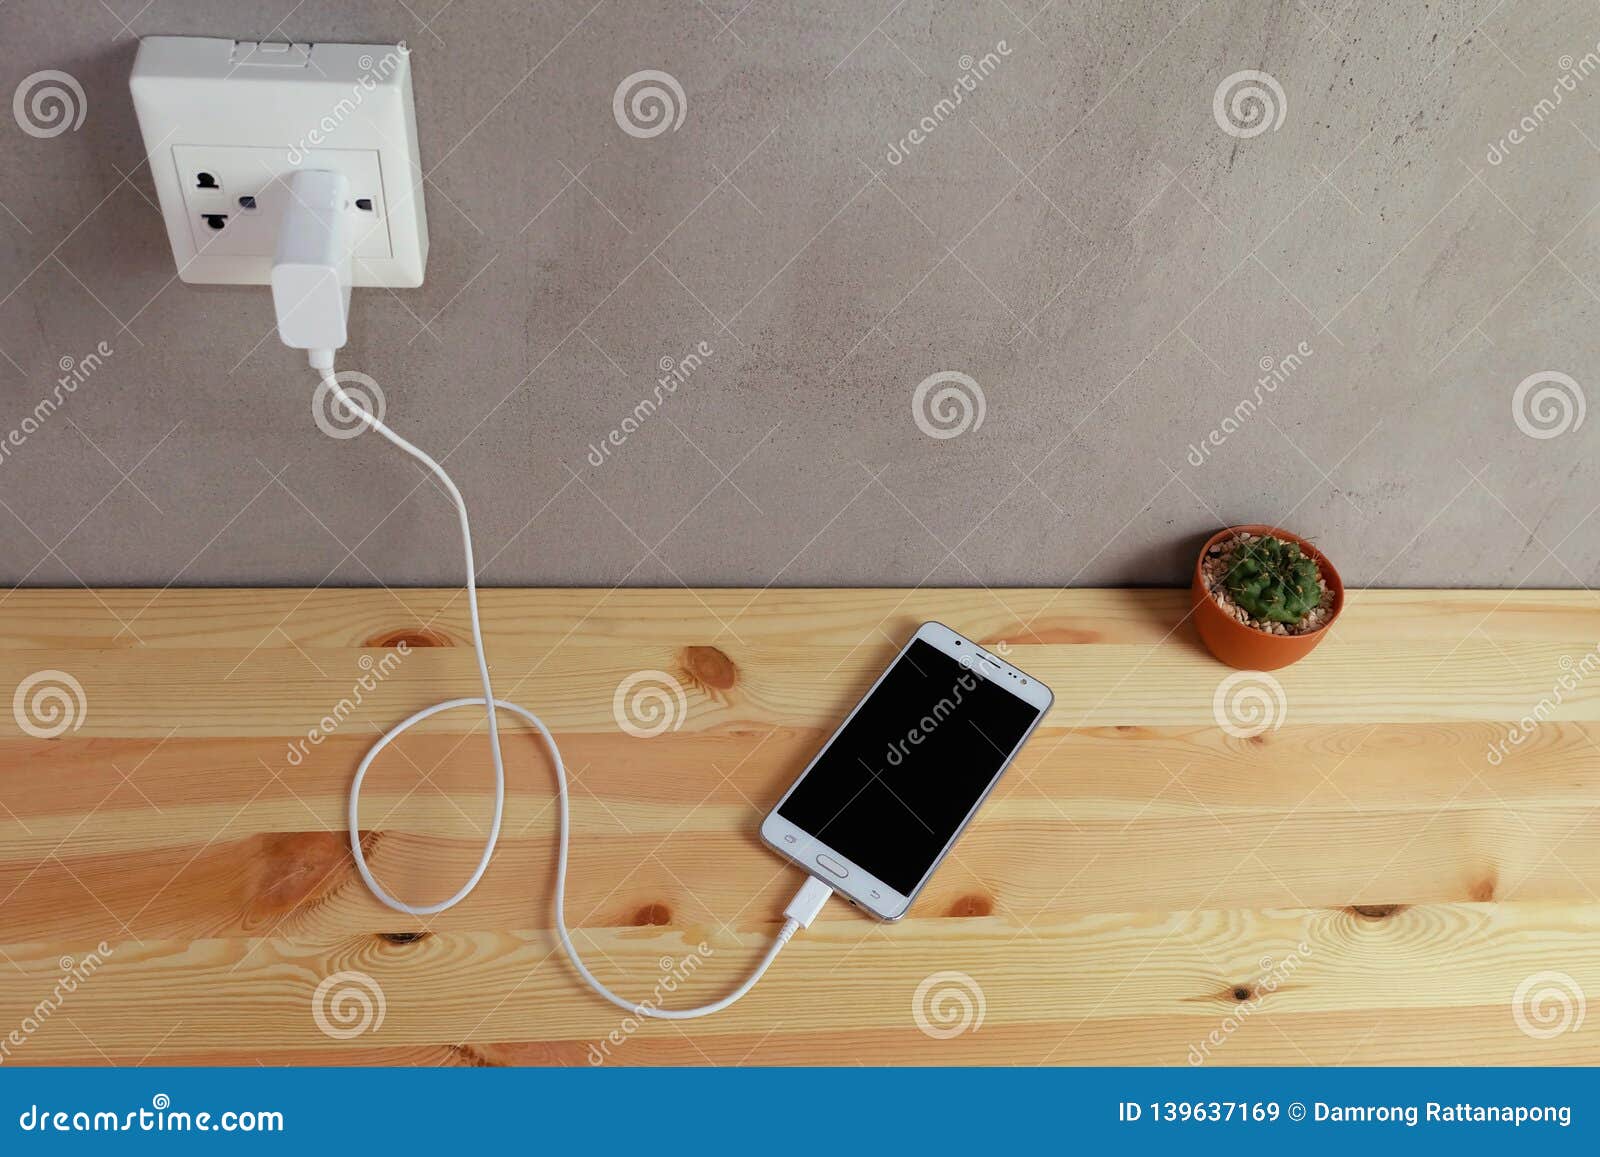 Plug in Power Outlet Adapter Cord Charger of Mobile Phone on Wooden Stock  Image - Image of connect, gadgets: 139637169